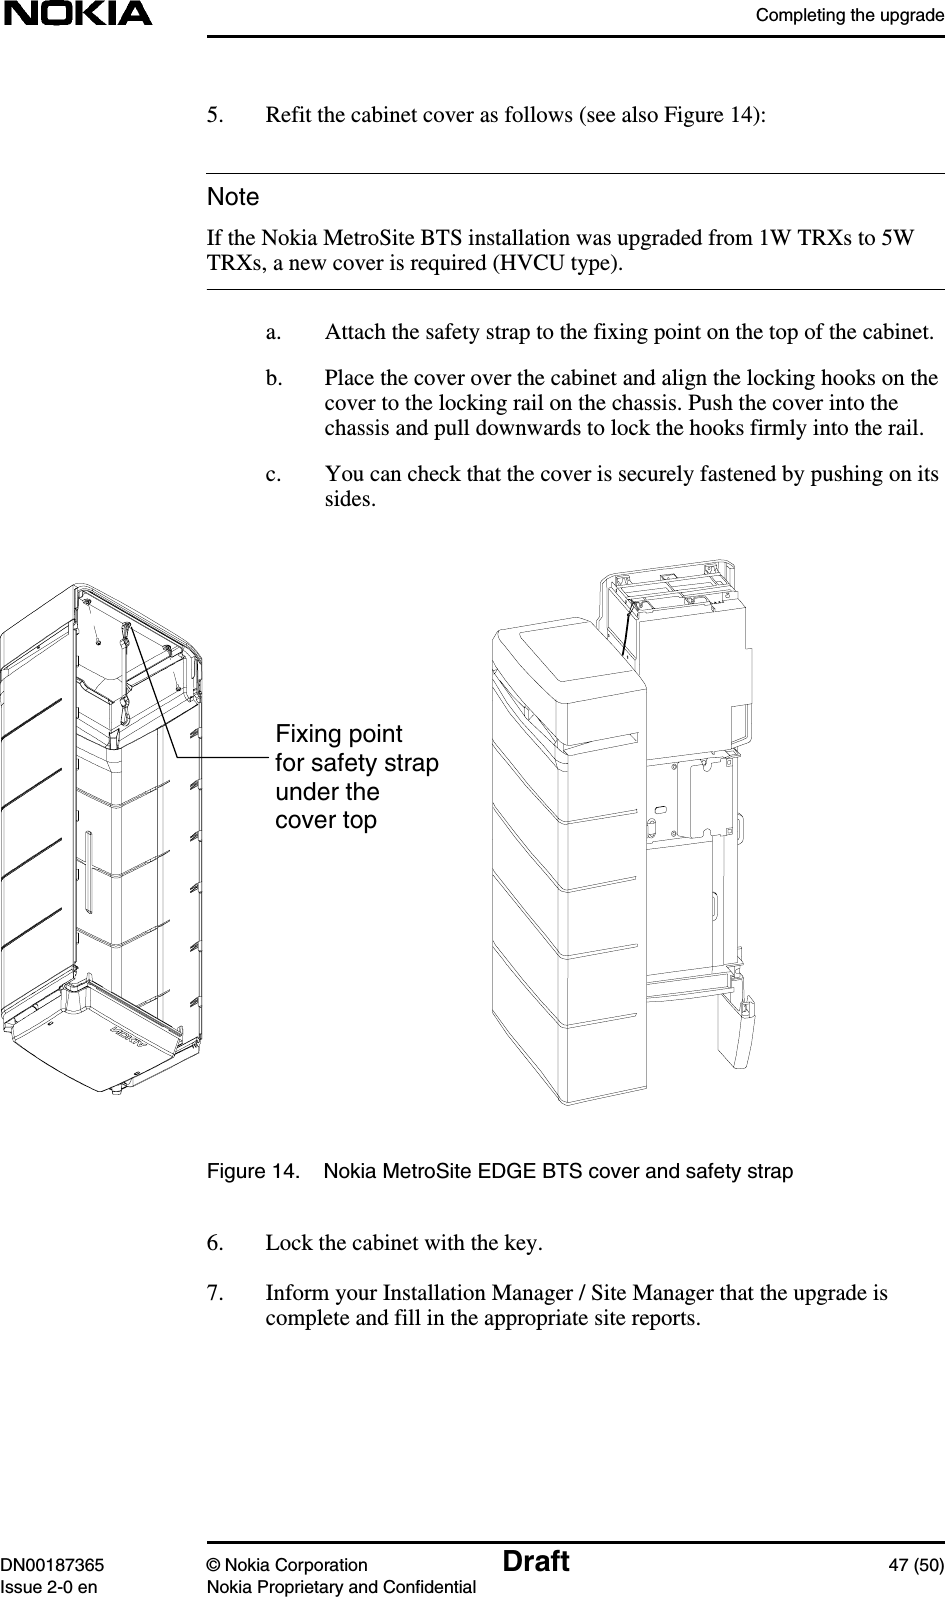 Completing the upgradeDN00187365 © Nokia Corporation Draft 47 (50)Issue 2-0 en Nokia Proprietary and ConfidentialNote5. Refit the cabinet cover as follows (see also Figure 14):If the Nokia MetroSite BTS installation was upgraded from 1W TRXs to 5WTRXs, a new cover is required (HVCU type).a. Attach the safety strap to the fixing point on the top of the cabinet.b. Place the cover over the cabinet and align the locking hooks on thecover to the locking rail on the chassis. Push the cover into thechassis and pull downwards to lock the hooks firmly into the rail.c. You can check that the cover is securely fastened by pushing on itssides.Figure 14. Nokia MetroSite EDGE BTS cover and safety strap6. Lock the cabinet with the key.7. Inform your Installation Manager / Site Manager that the upgrade iscomplete and fill in the appropriate site reports.Fixing pointfor safety strapunder thecover top